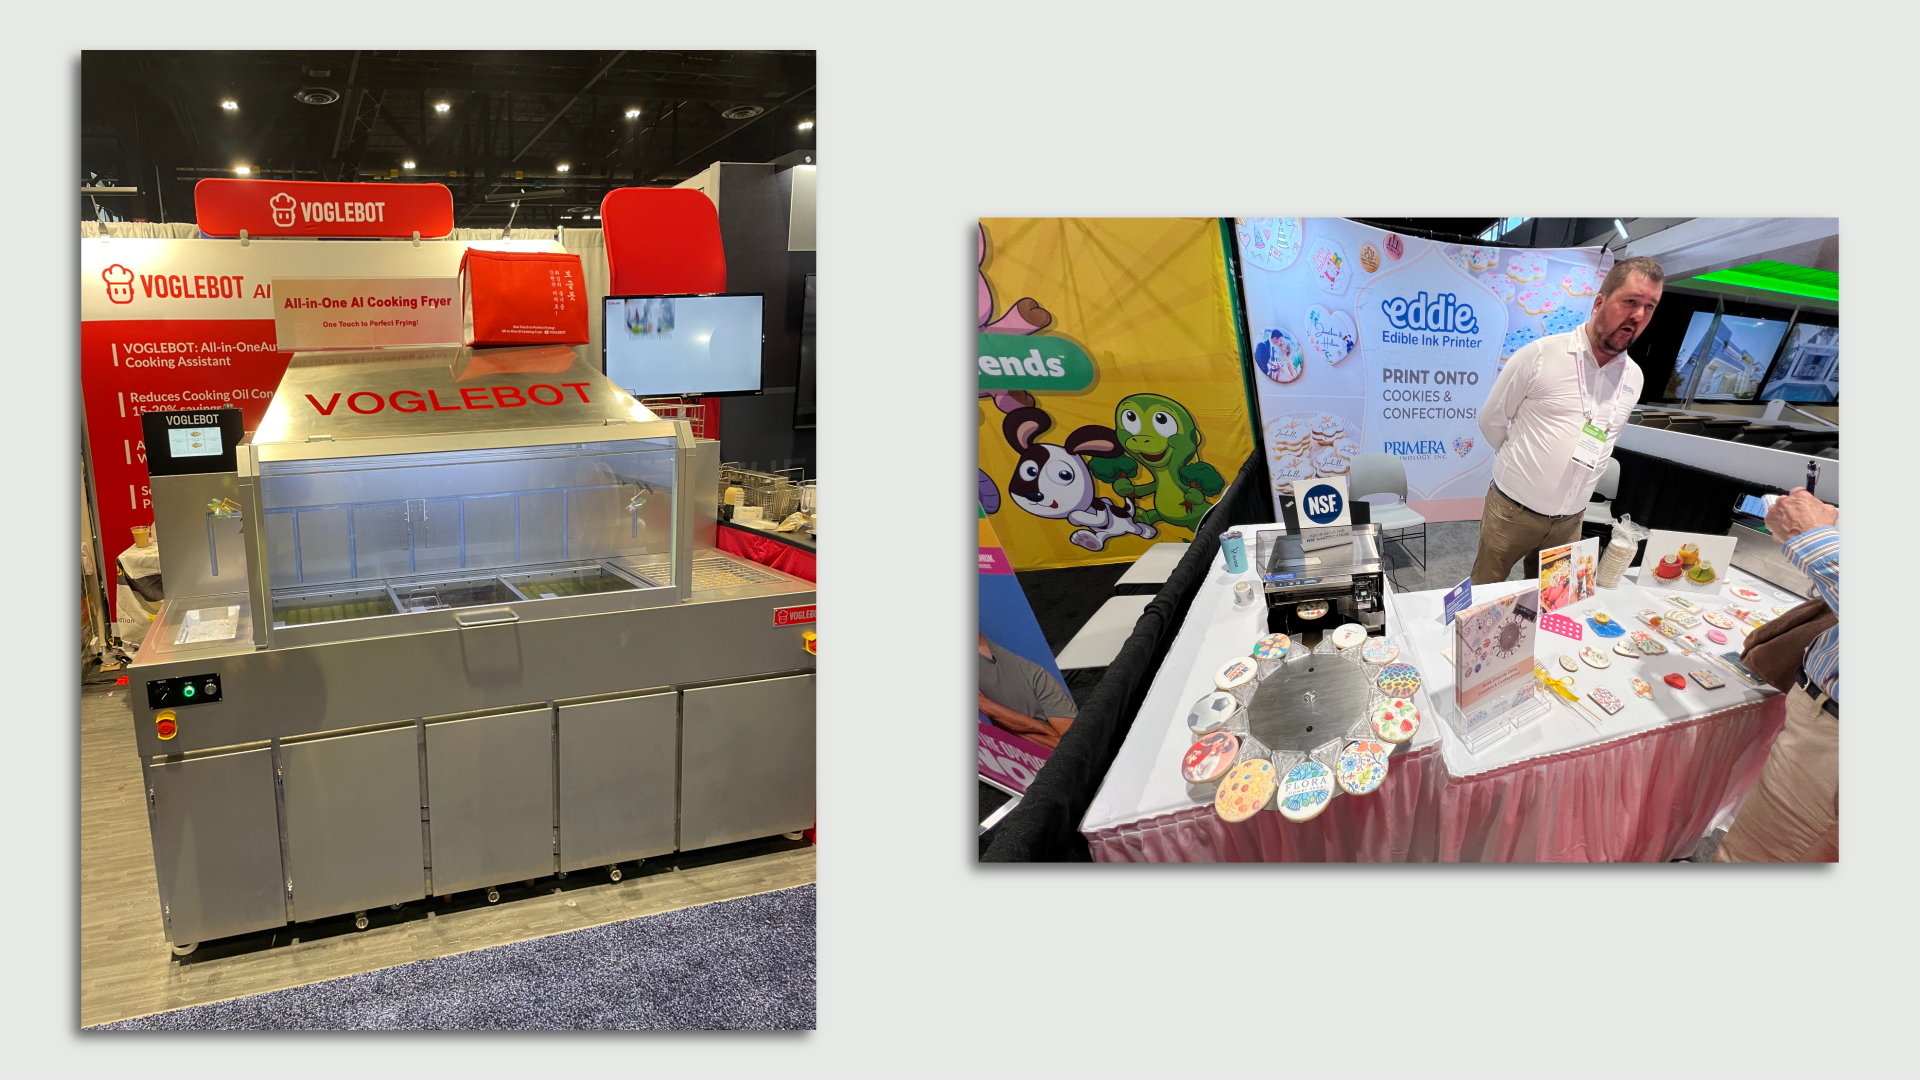 At left, the Voglebot is a robot all-in-one kitchen; at right, a machine that custom prints cookies.